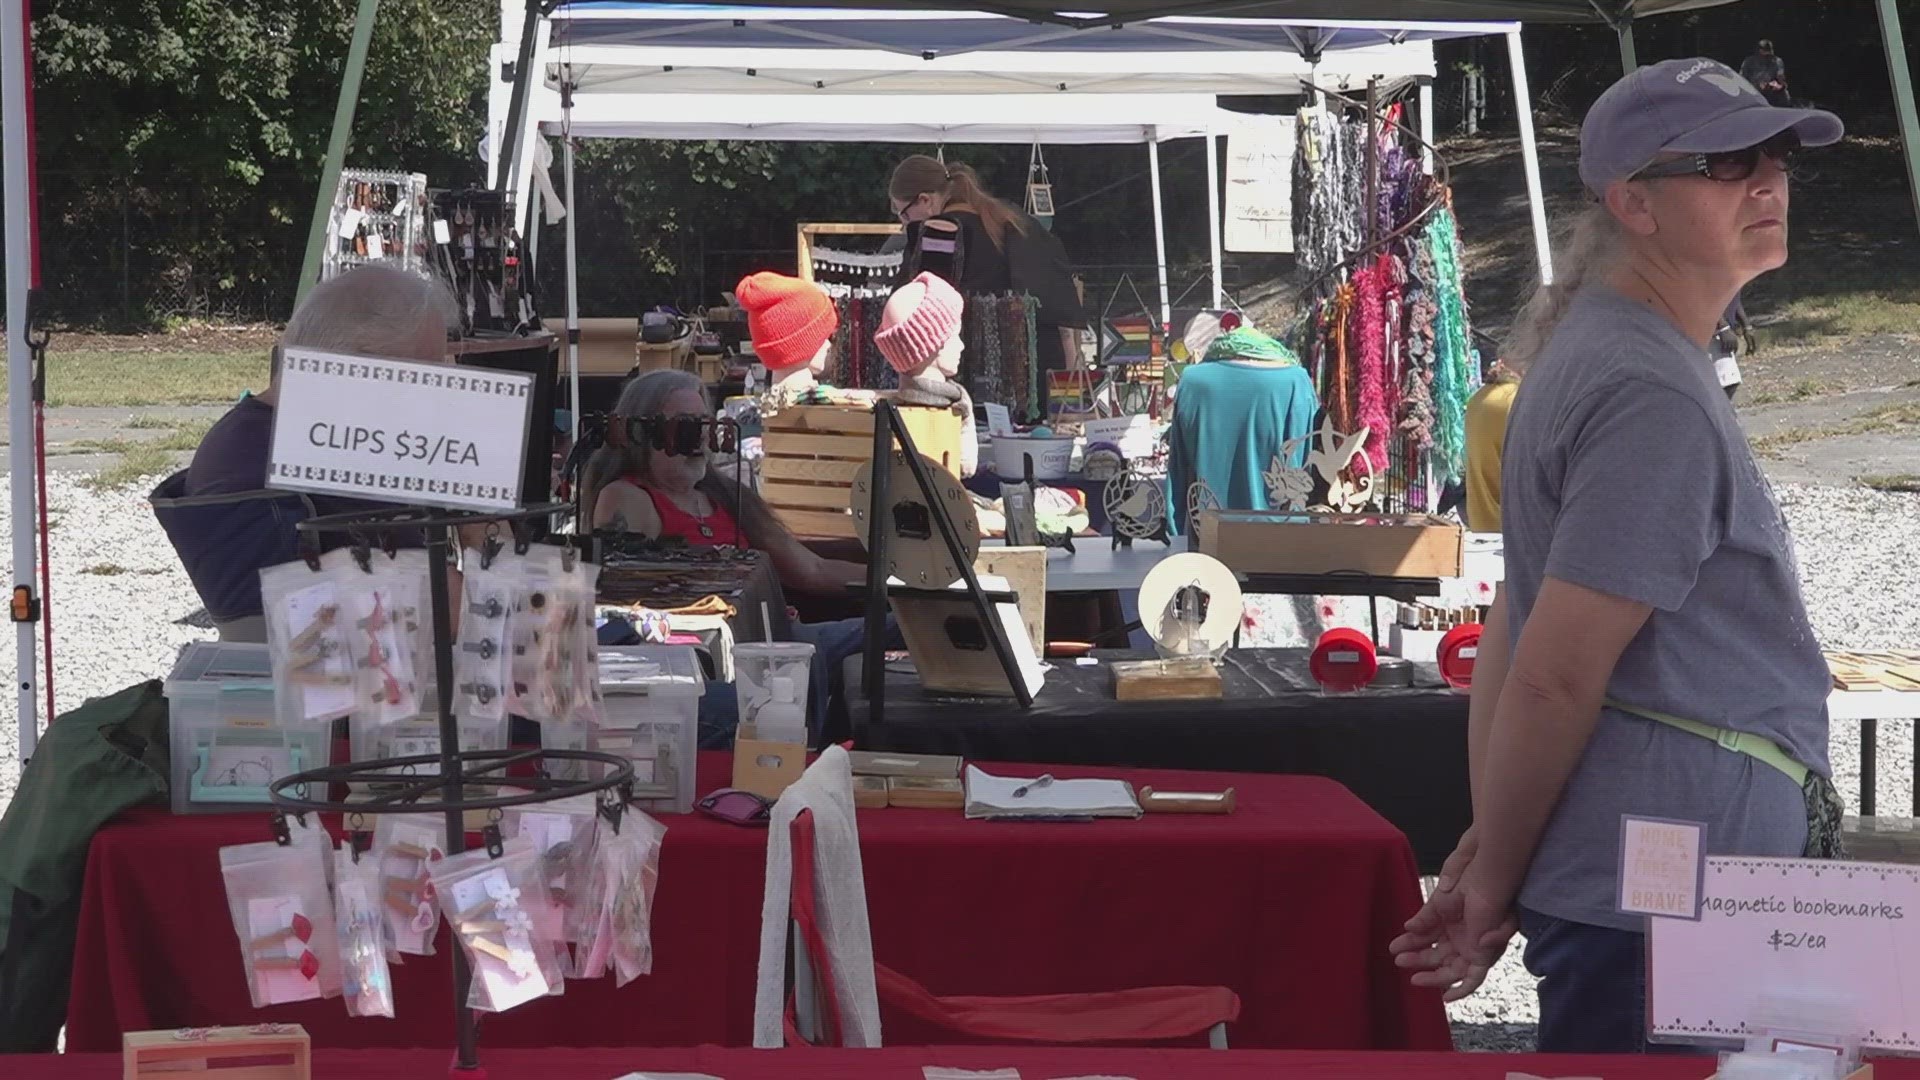 The market encourages vendors to share their skills and encourages shoppers to buy locally.